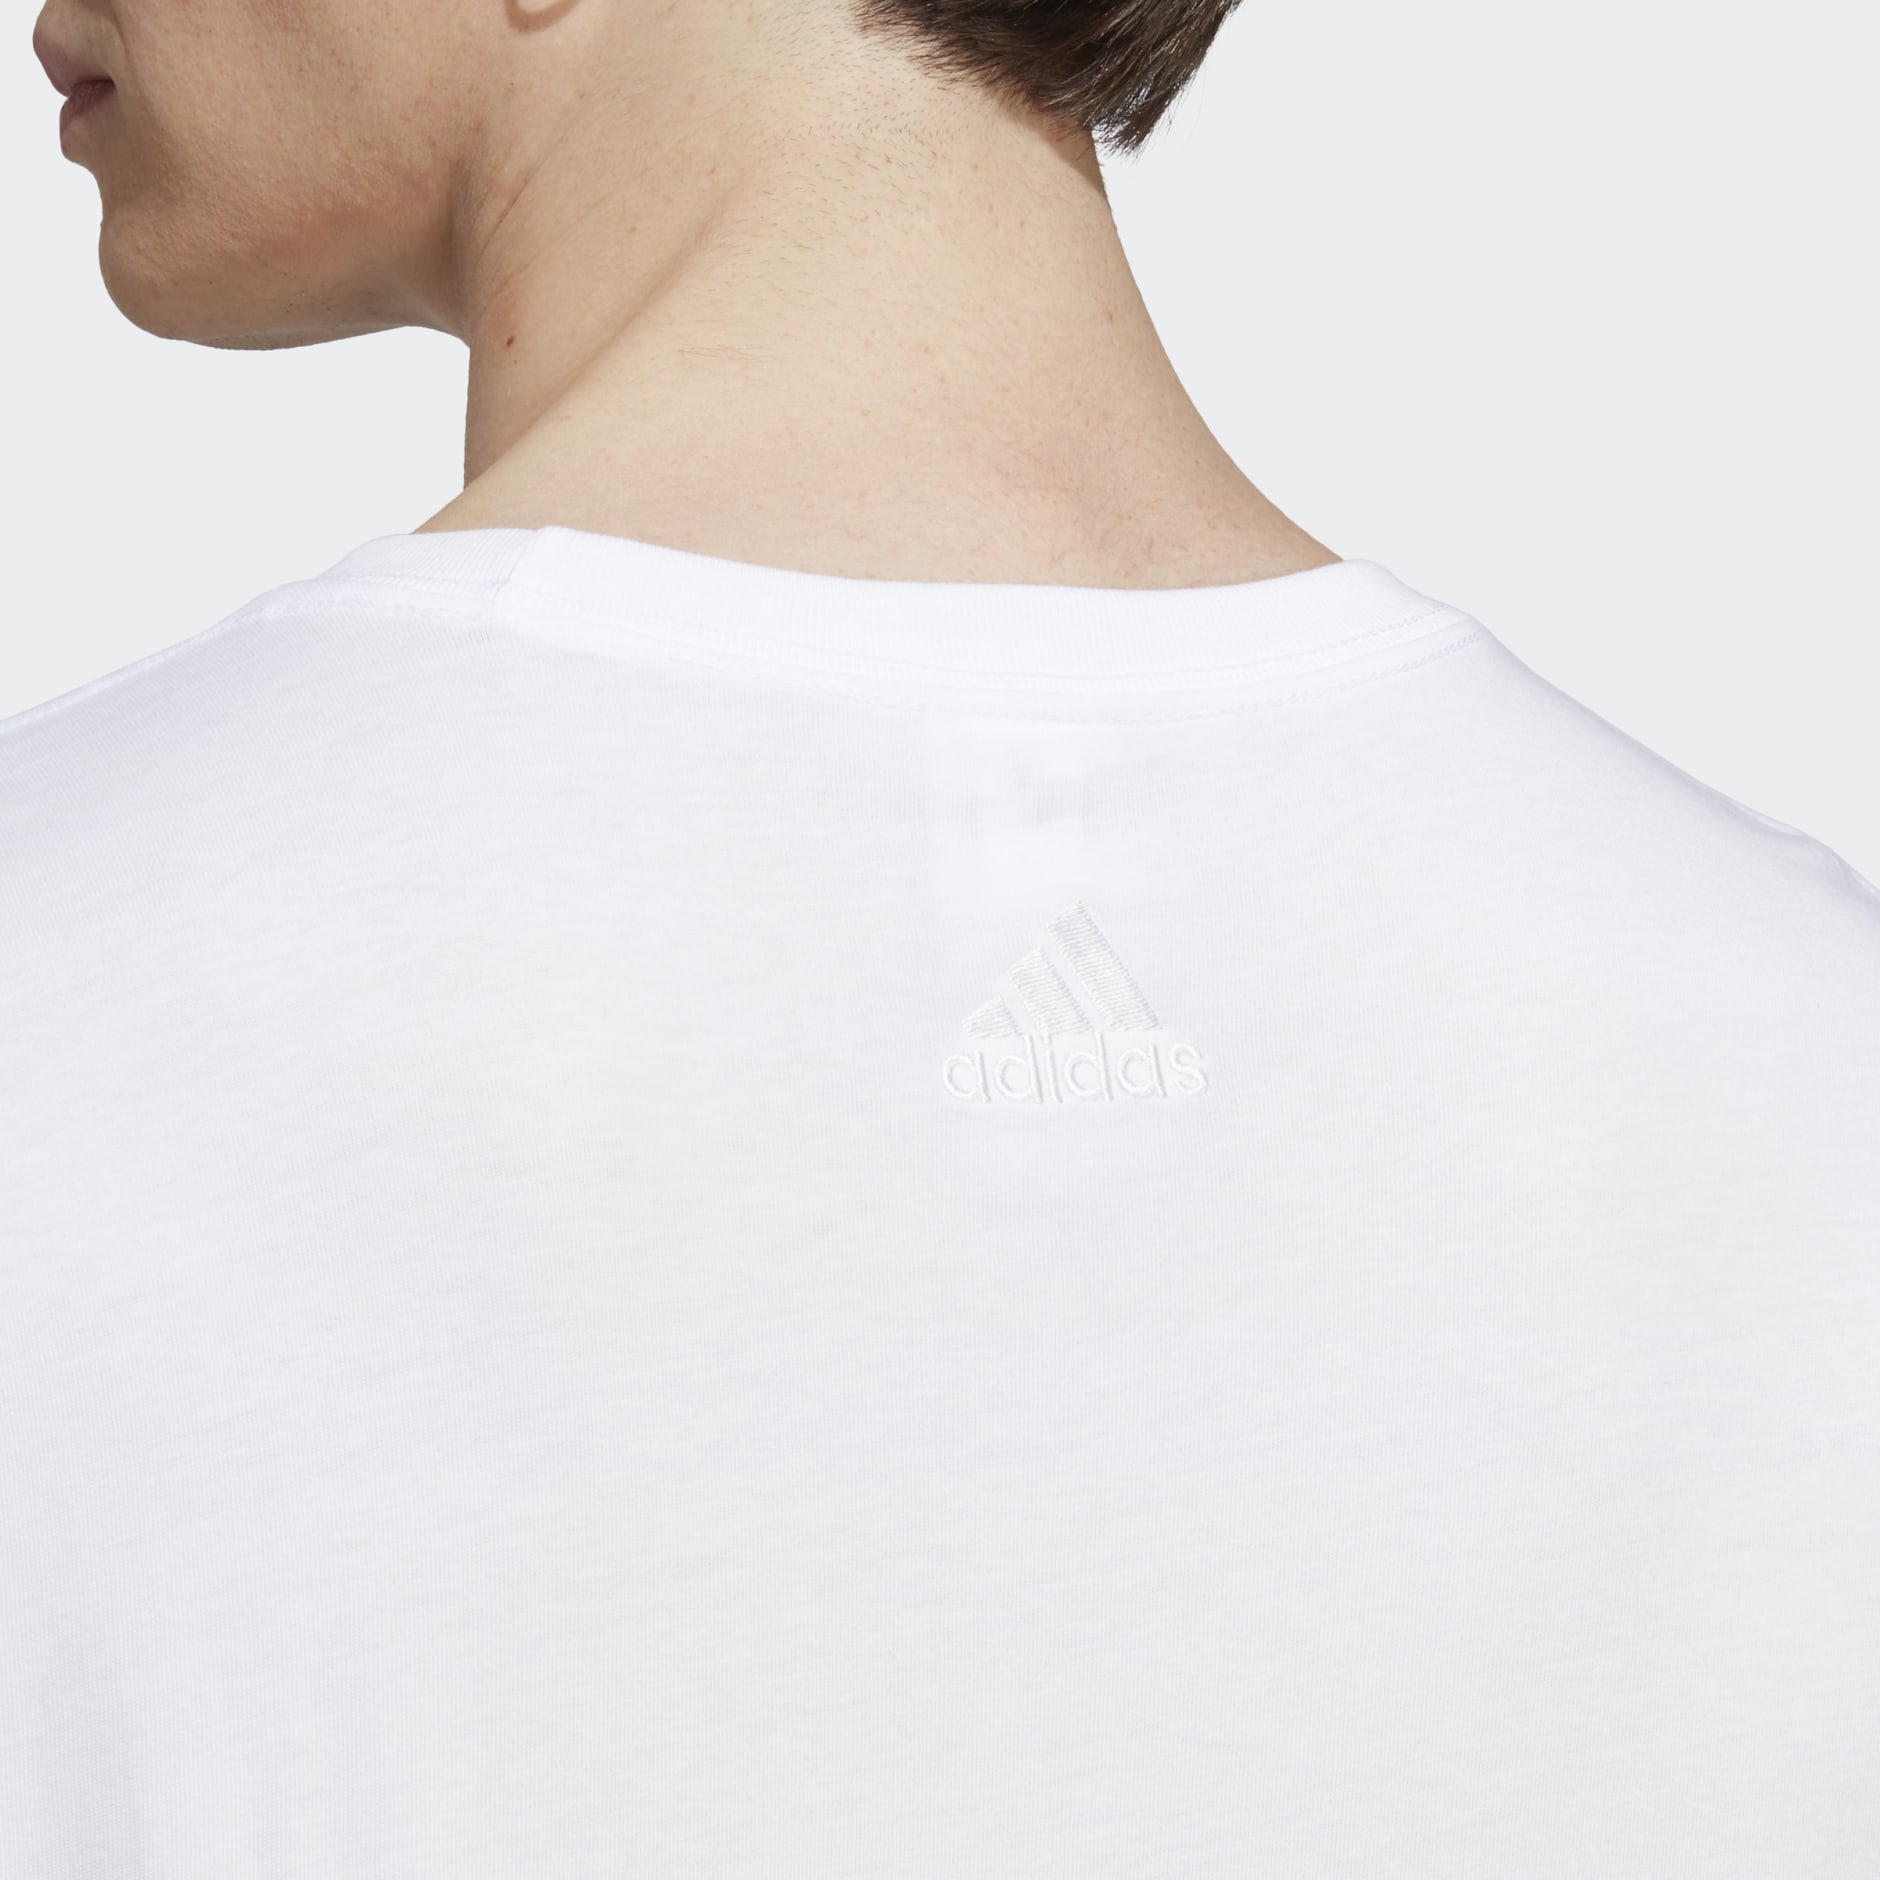 Tee Linear Single | White adidas - Logo Jersey Embroidered adidas GH Essentials